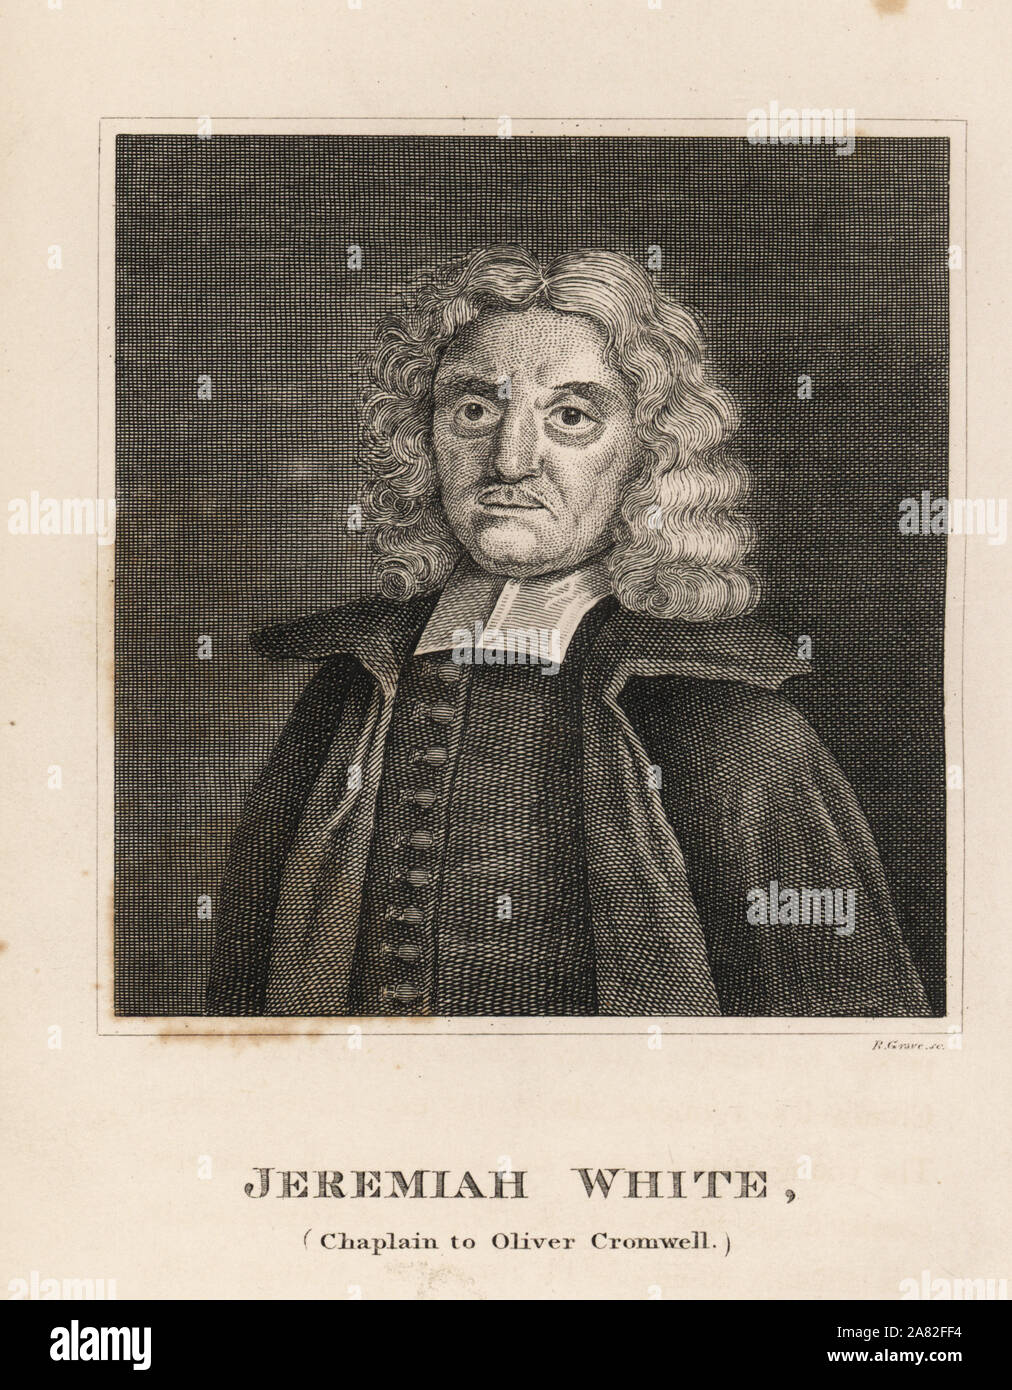 Jeremiah White, chaplain to Oliver Cromwell, 17th century. Engraving by R. Grave from James Caulfield's Portraits, Memoirs and Characters of Remarkable Persons, London, 1819. Stock Photo